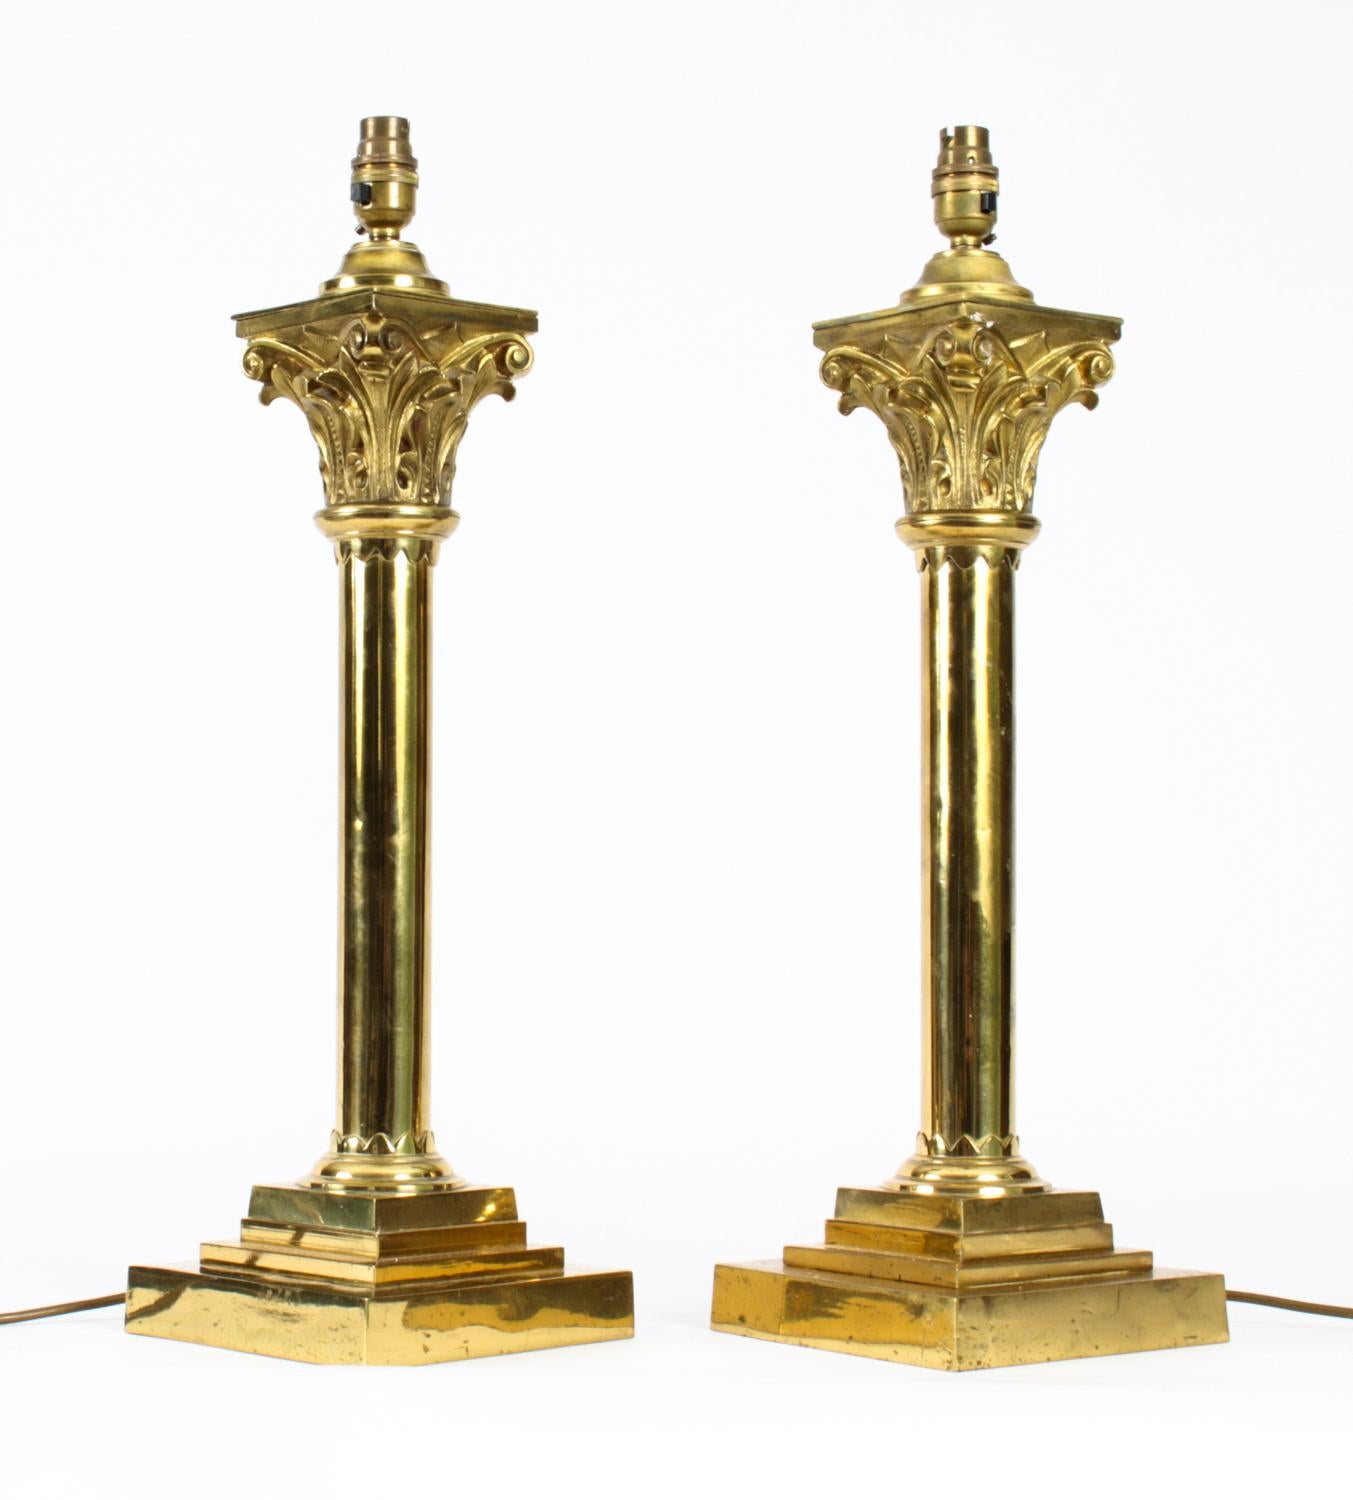 This is a splendid pair of antique Victorian brass columnar Corinthian column table lamps, now converted to electricity from oil lamps, late 19th century in date.

This opulent pair of antique table lamps feature Kingly Corinthian Capitals